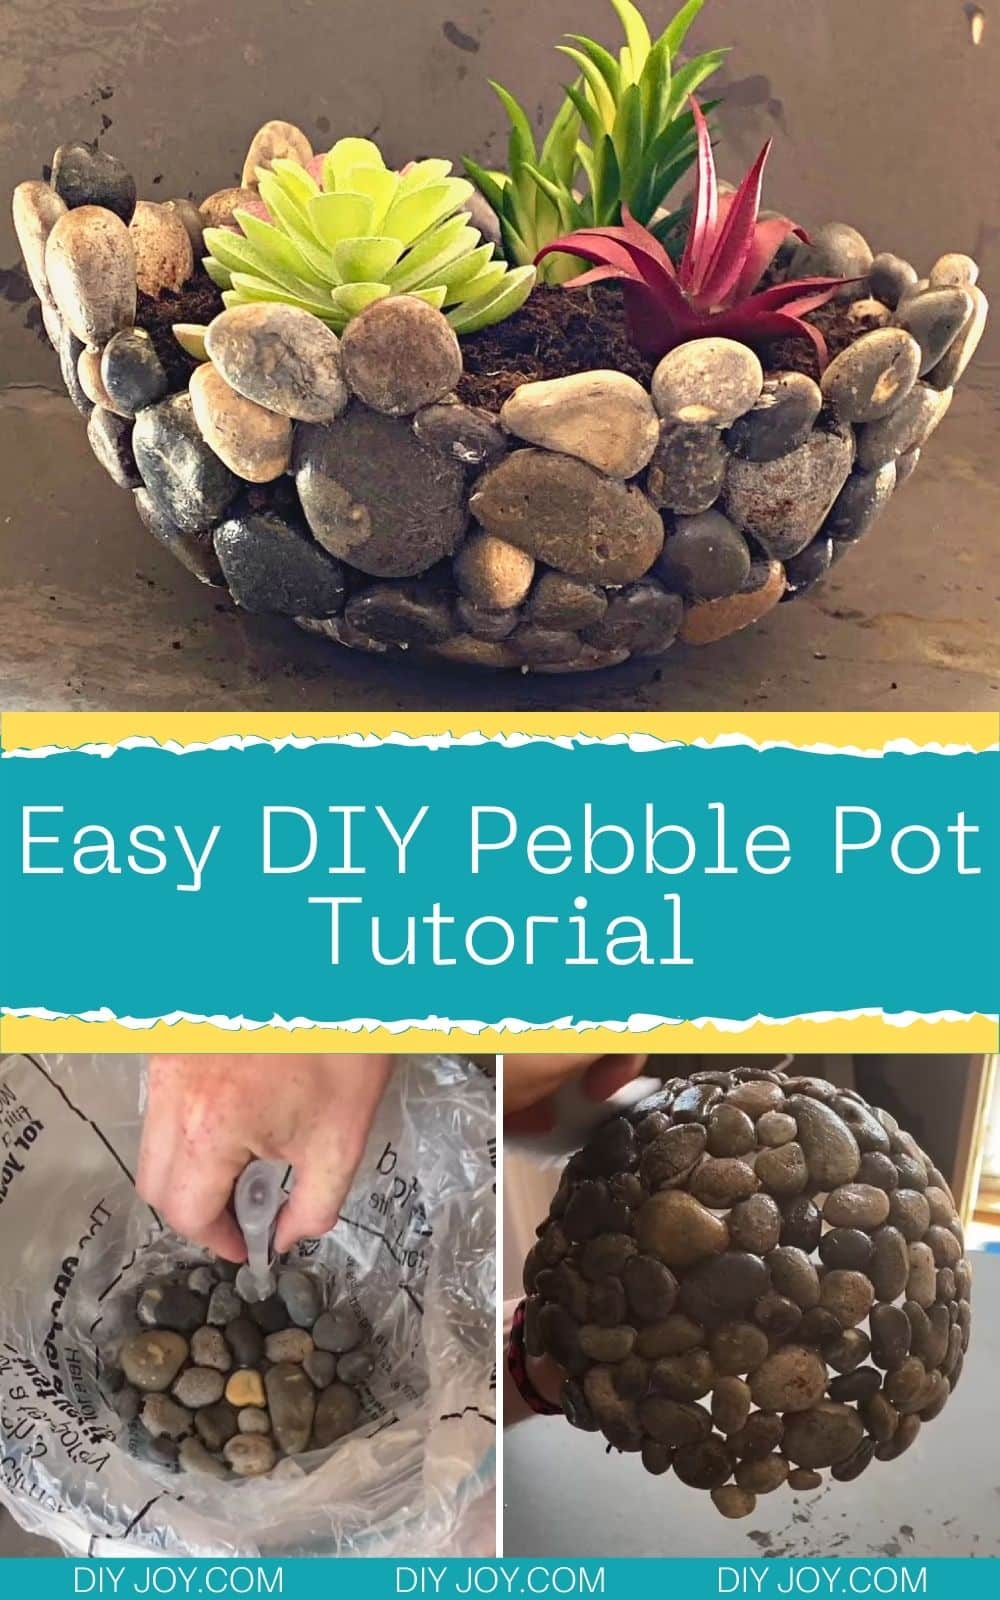 Pebble Pot - Easy Crafts with Rocks - How to Make a Pebble Pot